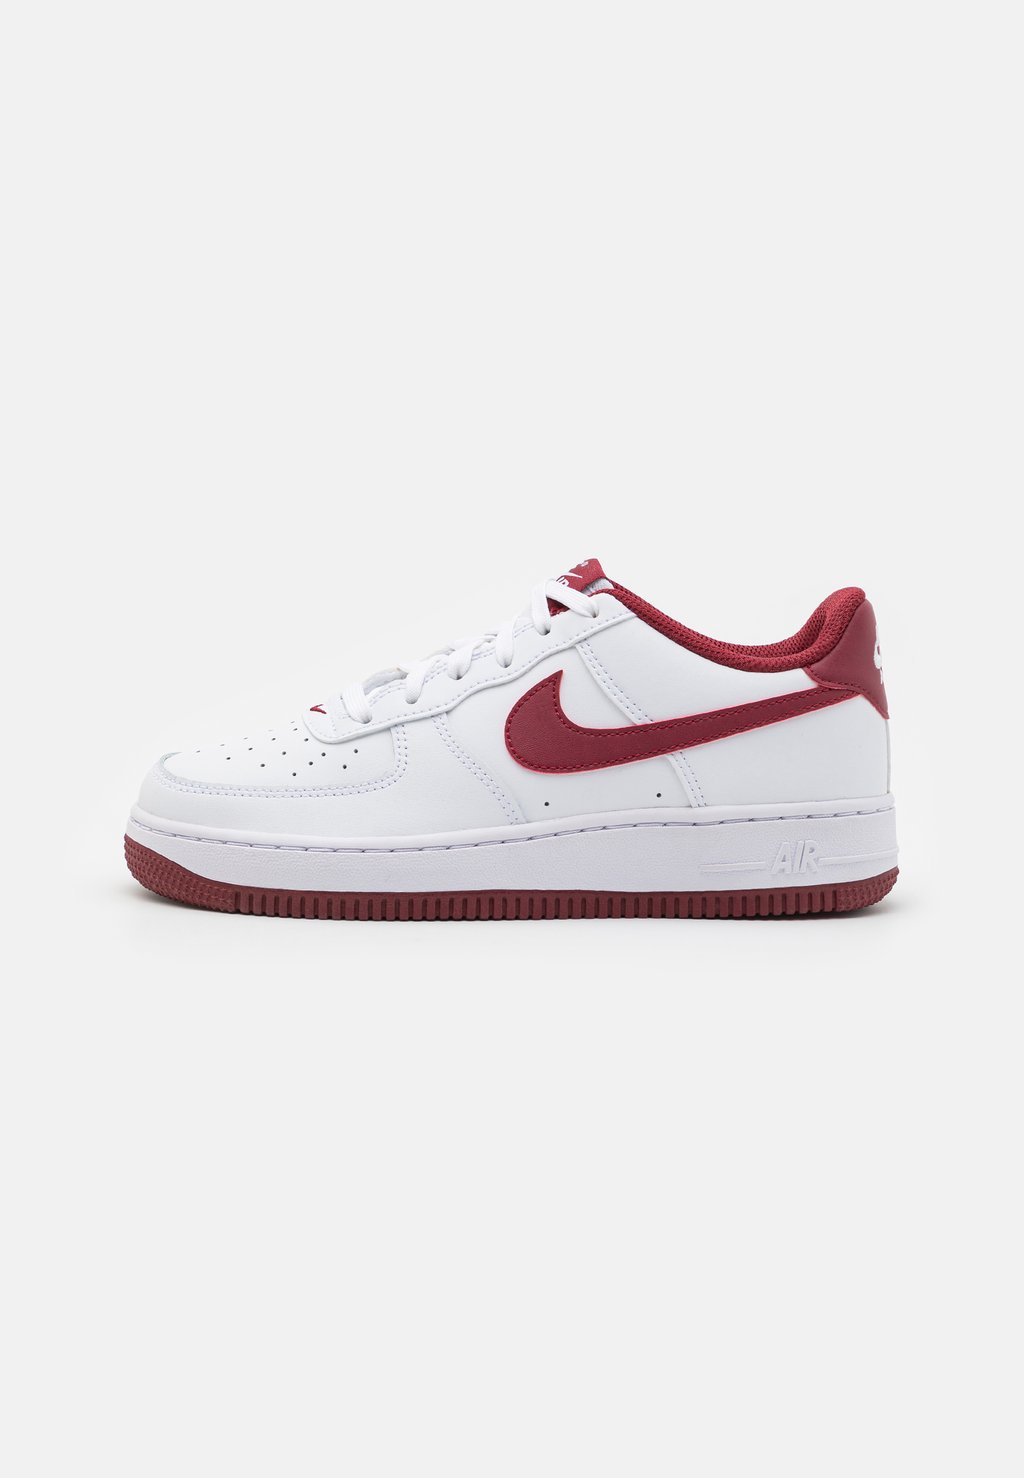 Кроссовки низкие AIR FORCE 1 UNISEX Nike Sportswear, цвет white/picante red/team red низкие кроссовки dunk vday nike цвет white team red adobe dragon red